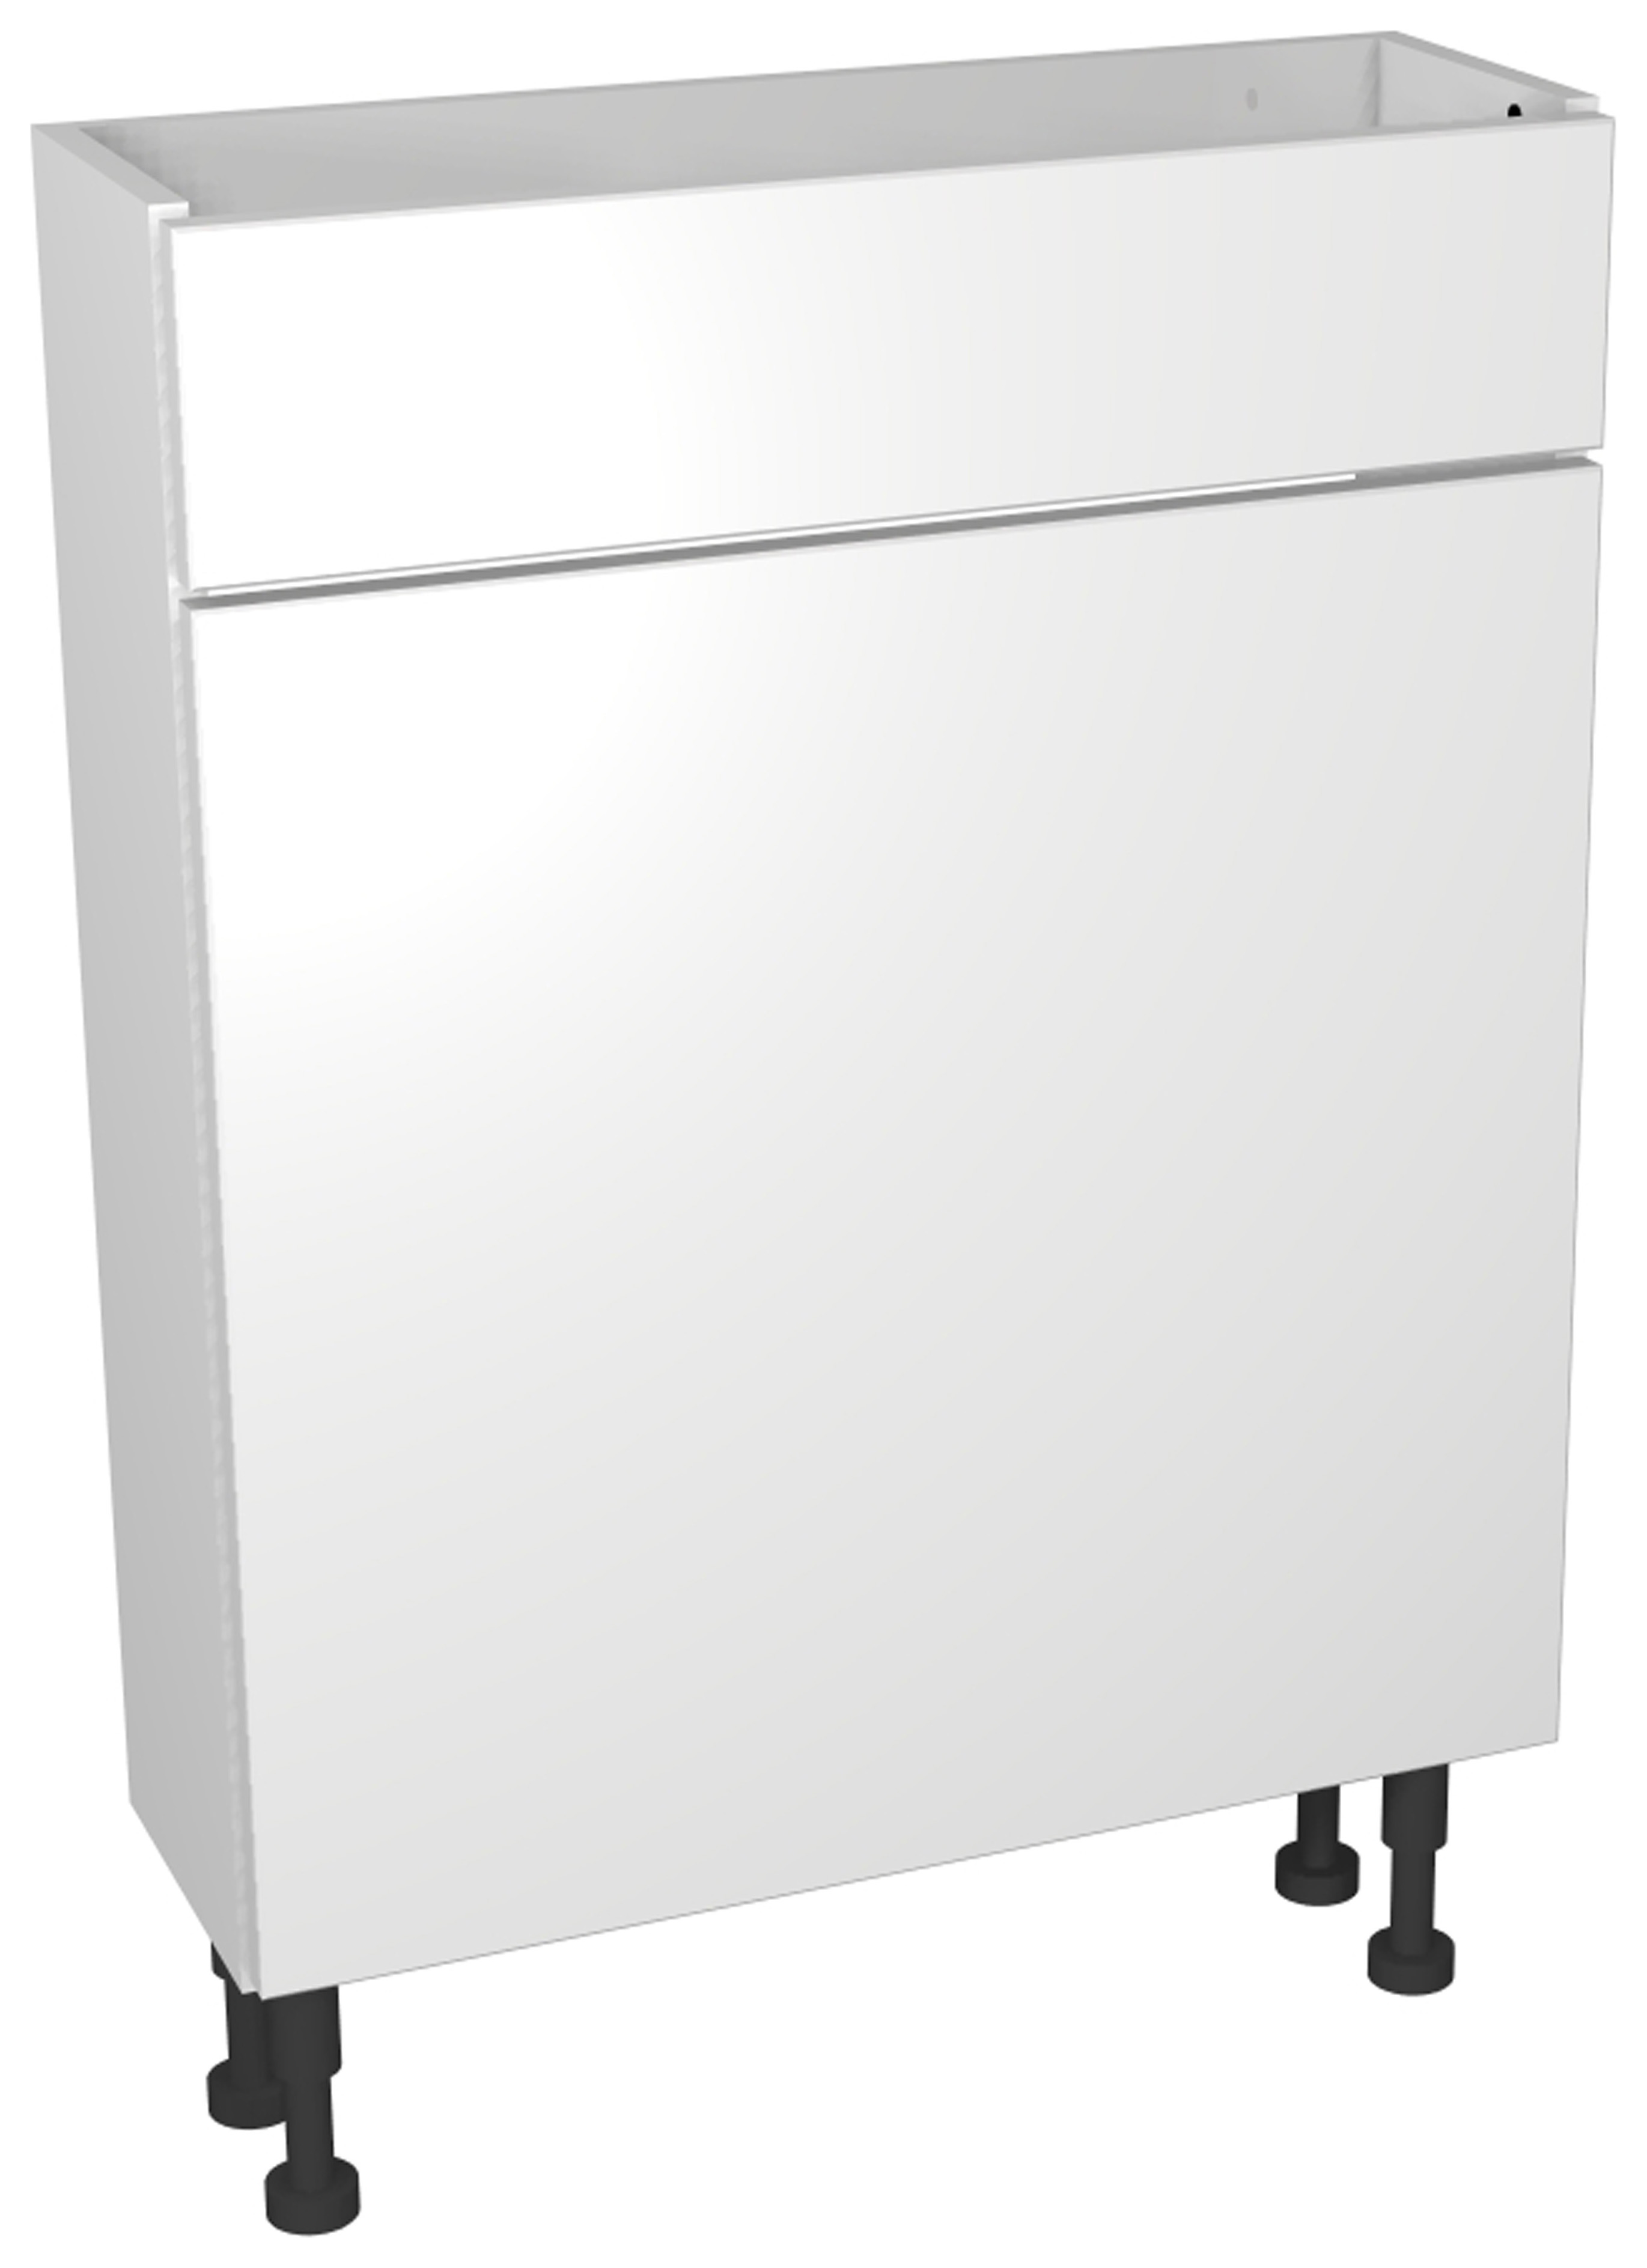 Image of Wickes Vienna Modern Compact WC Unit, in White, Size: 600x735mm